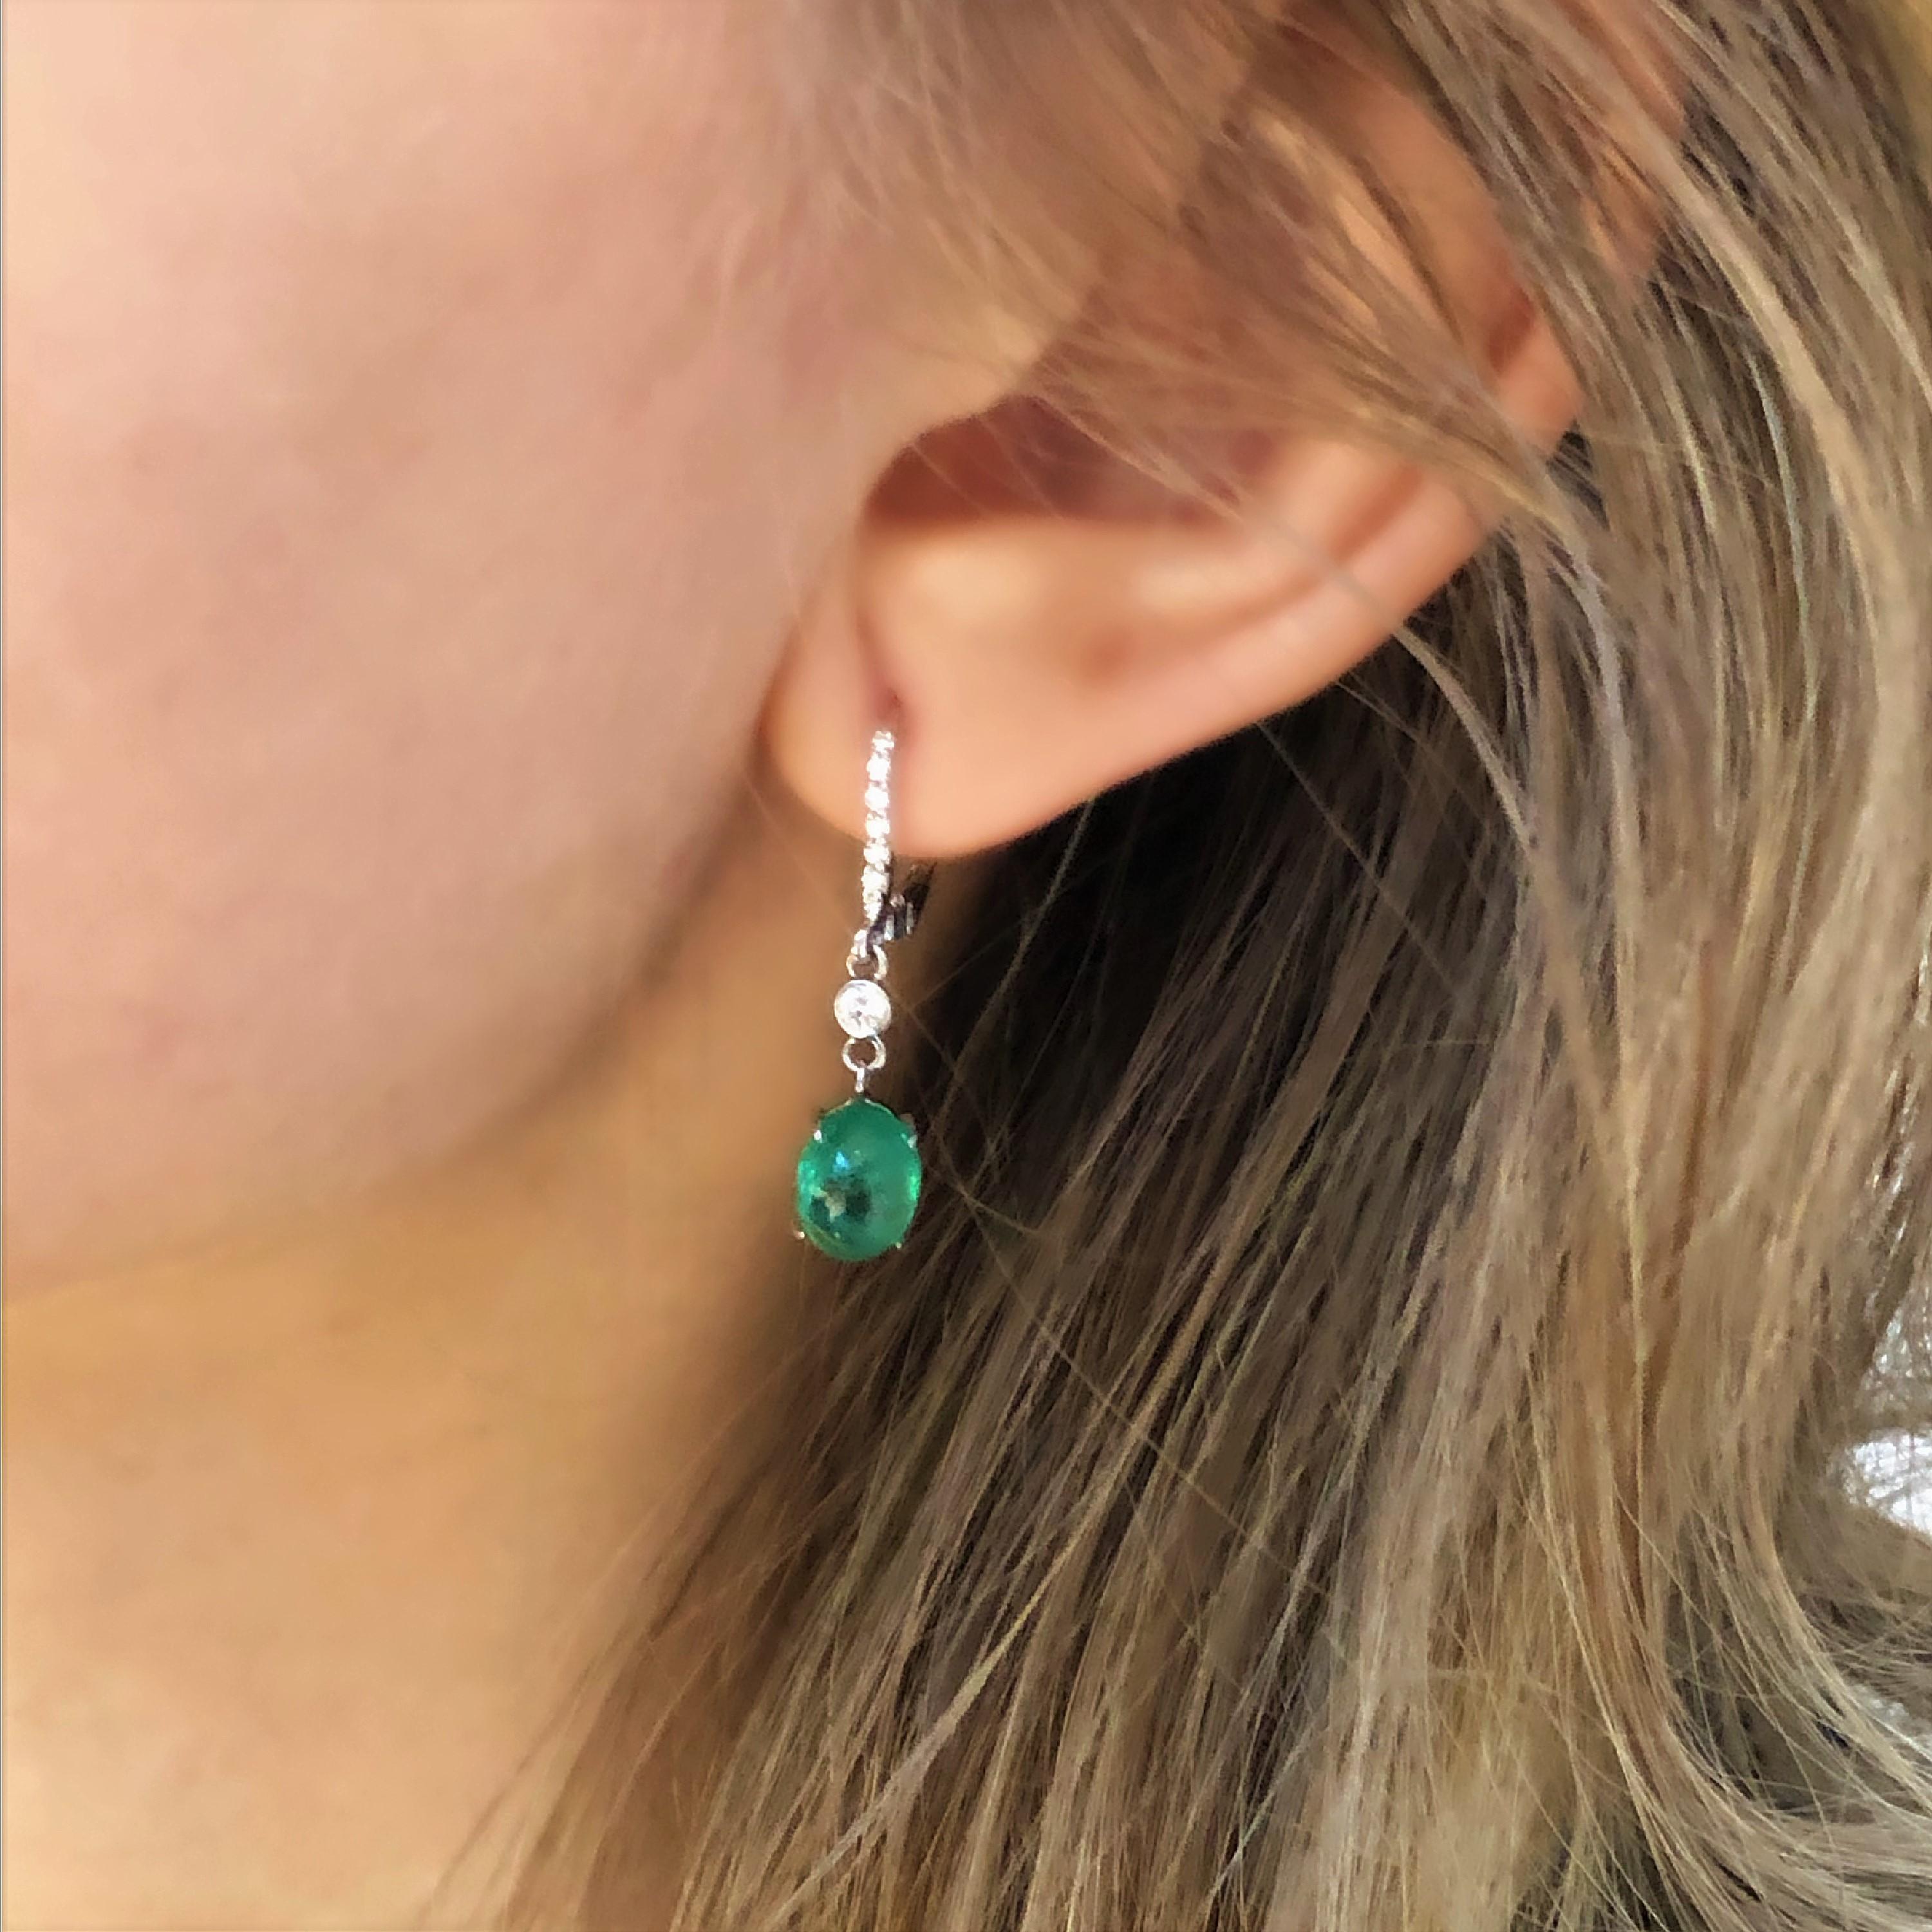 Oval Cut Diamond and Cabochon Emerald White Gold Hoop Earrings Weighing 5.08 Carat